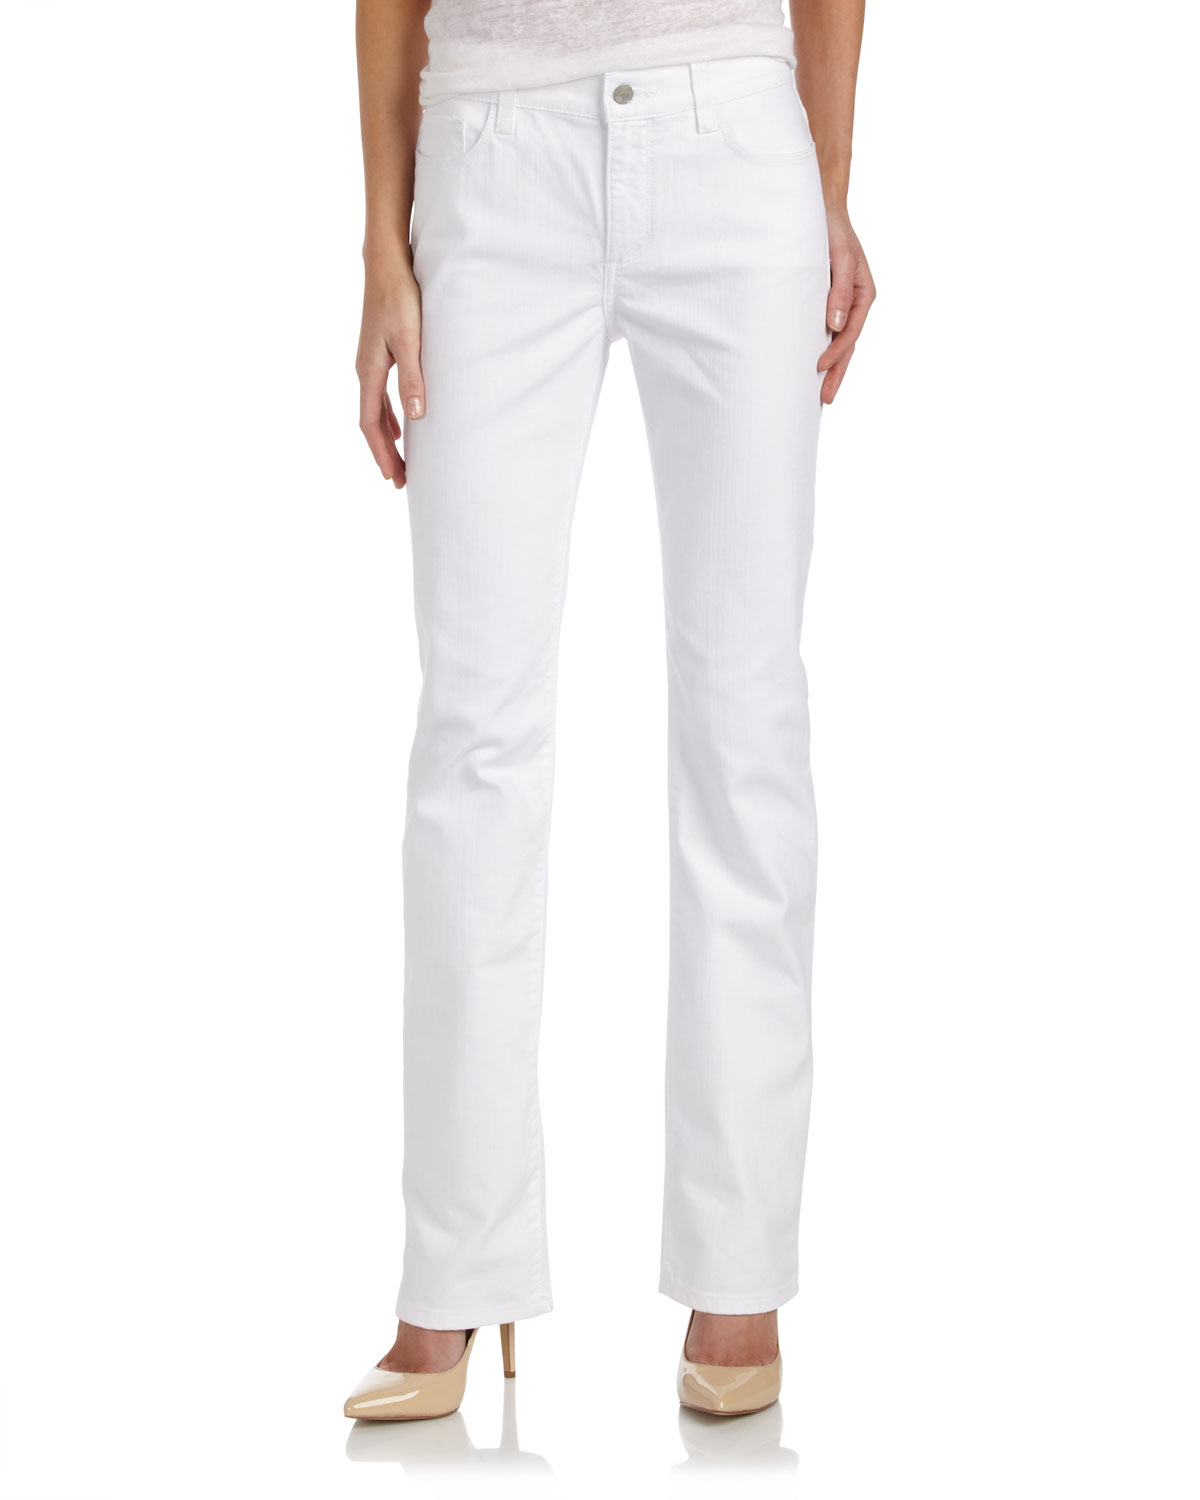 Not Your Daughter's Jeans Ankle Length Jeans in White | Lyst